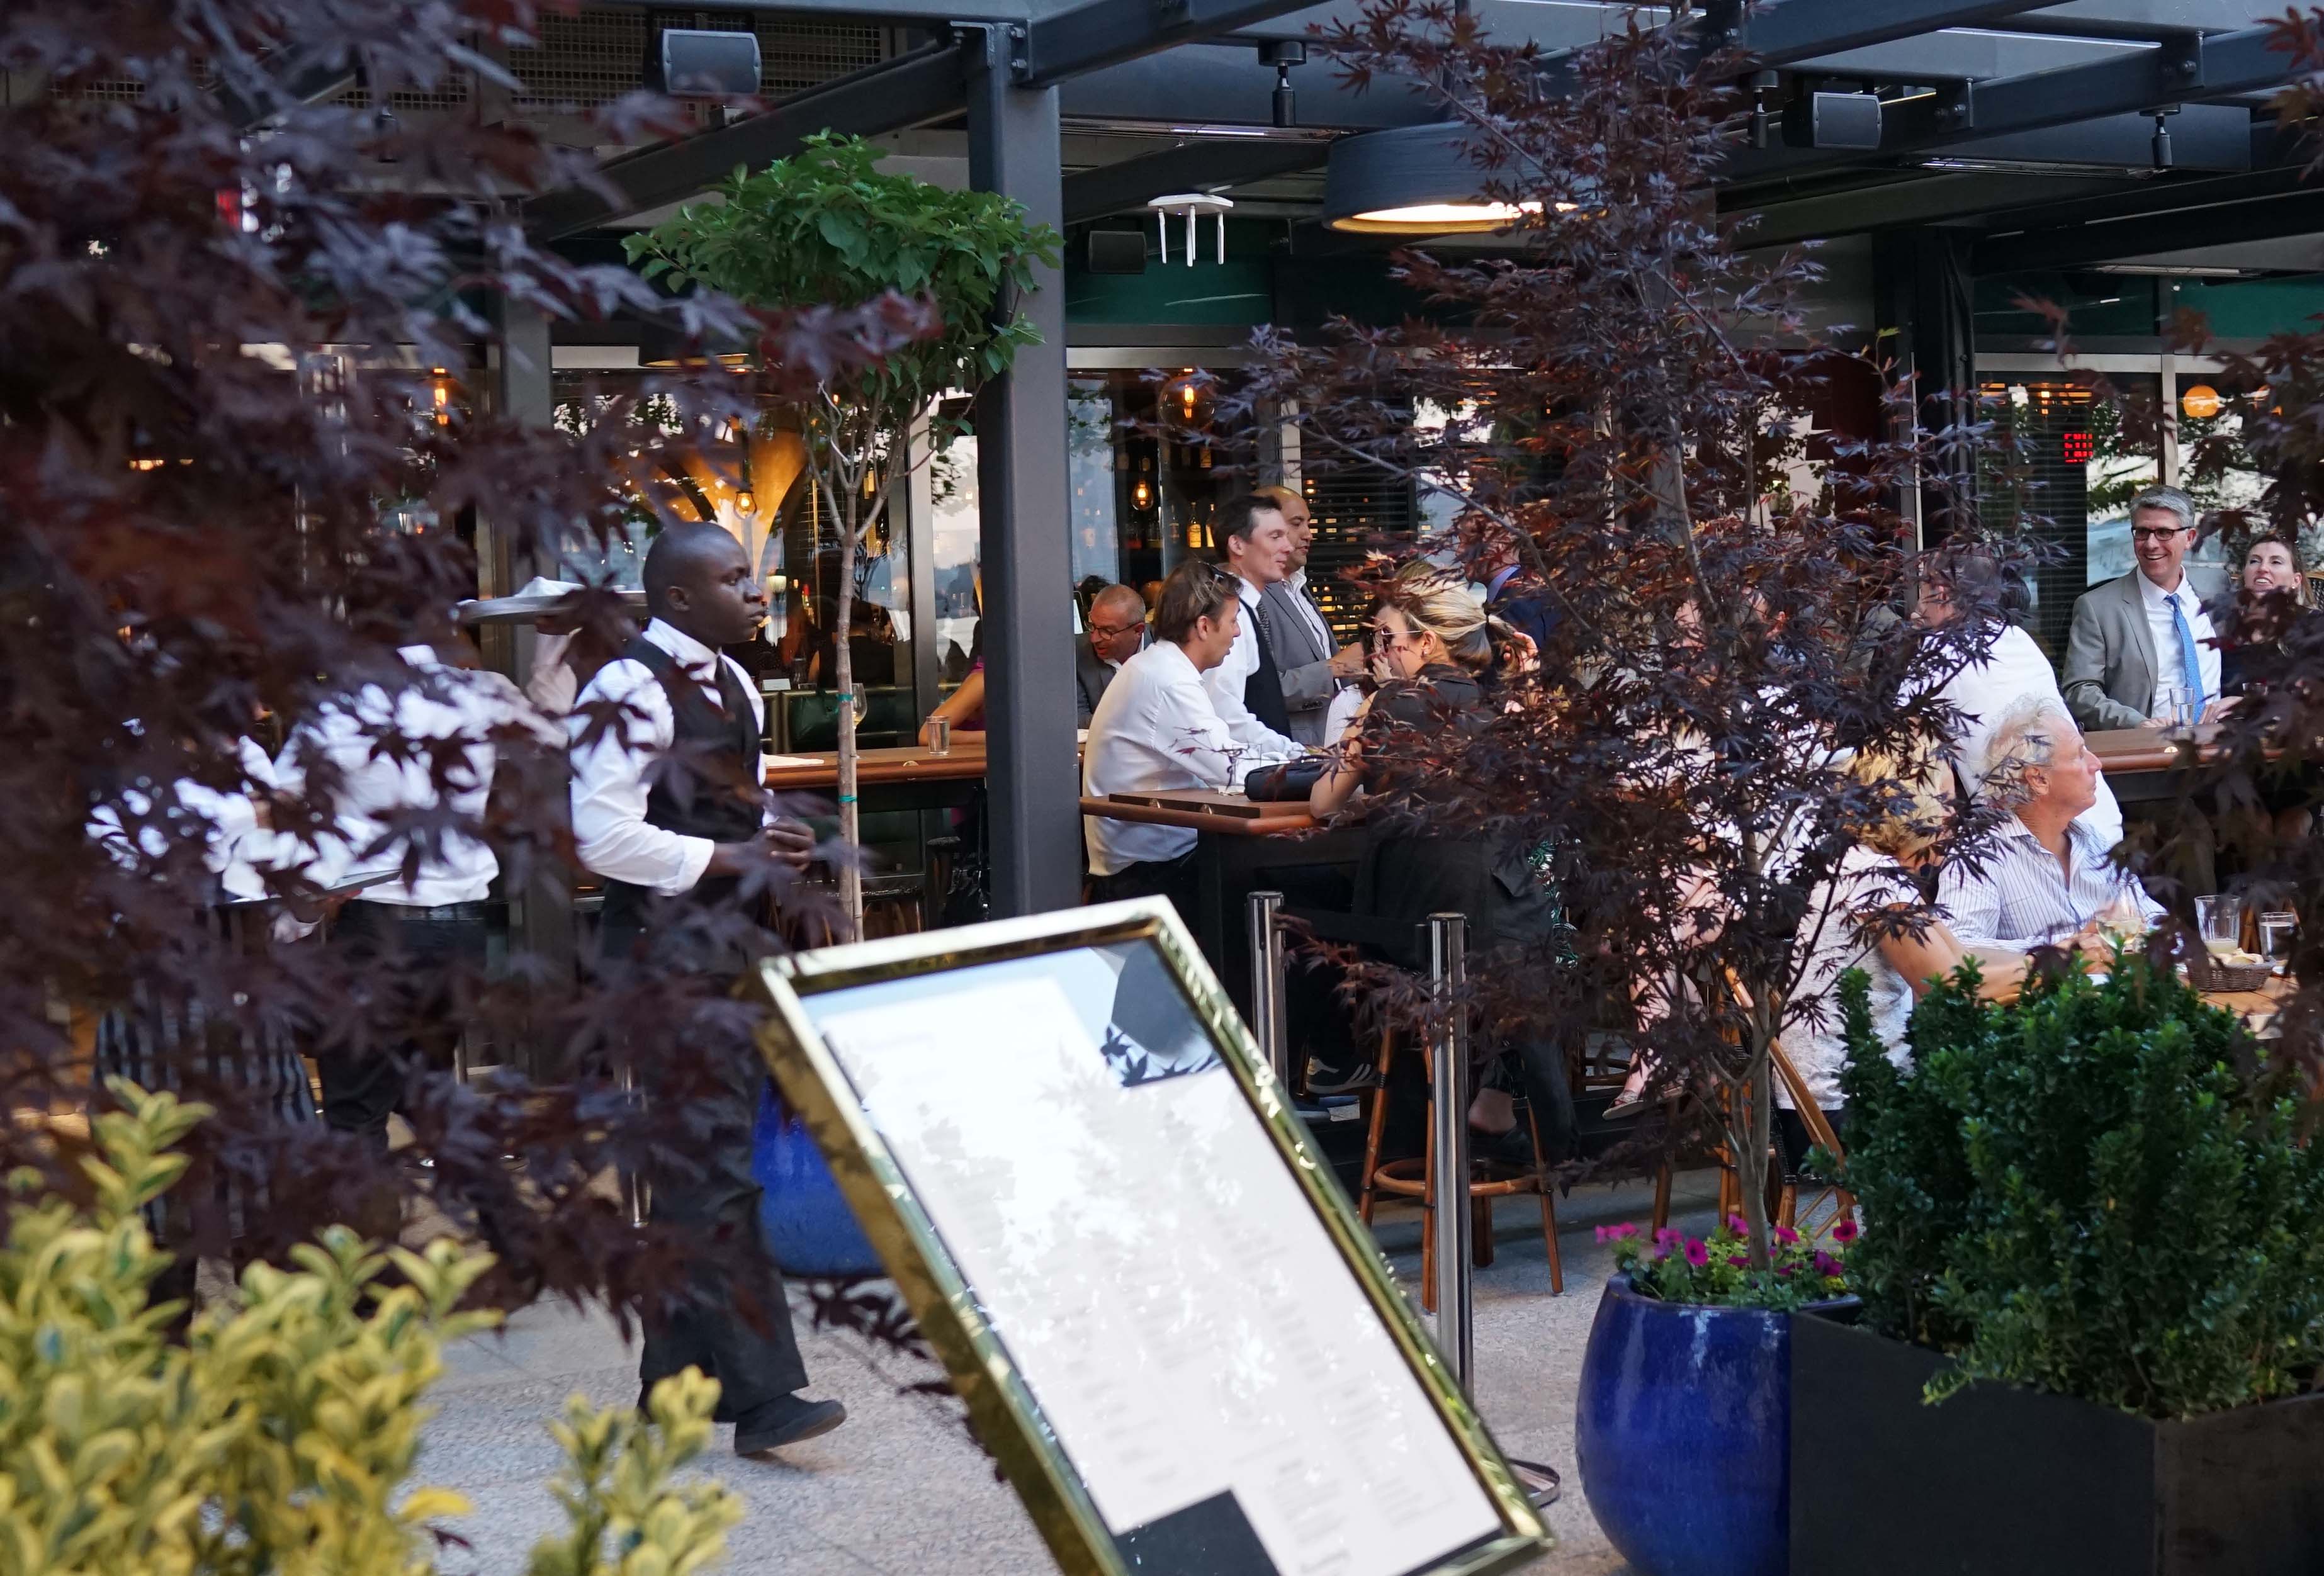 Le District outdoor dining 6-10-2015